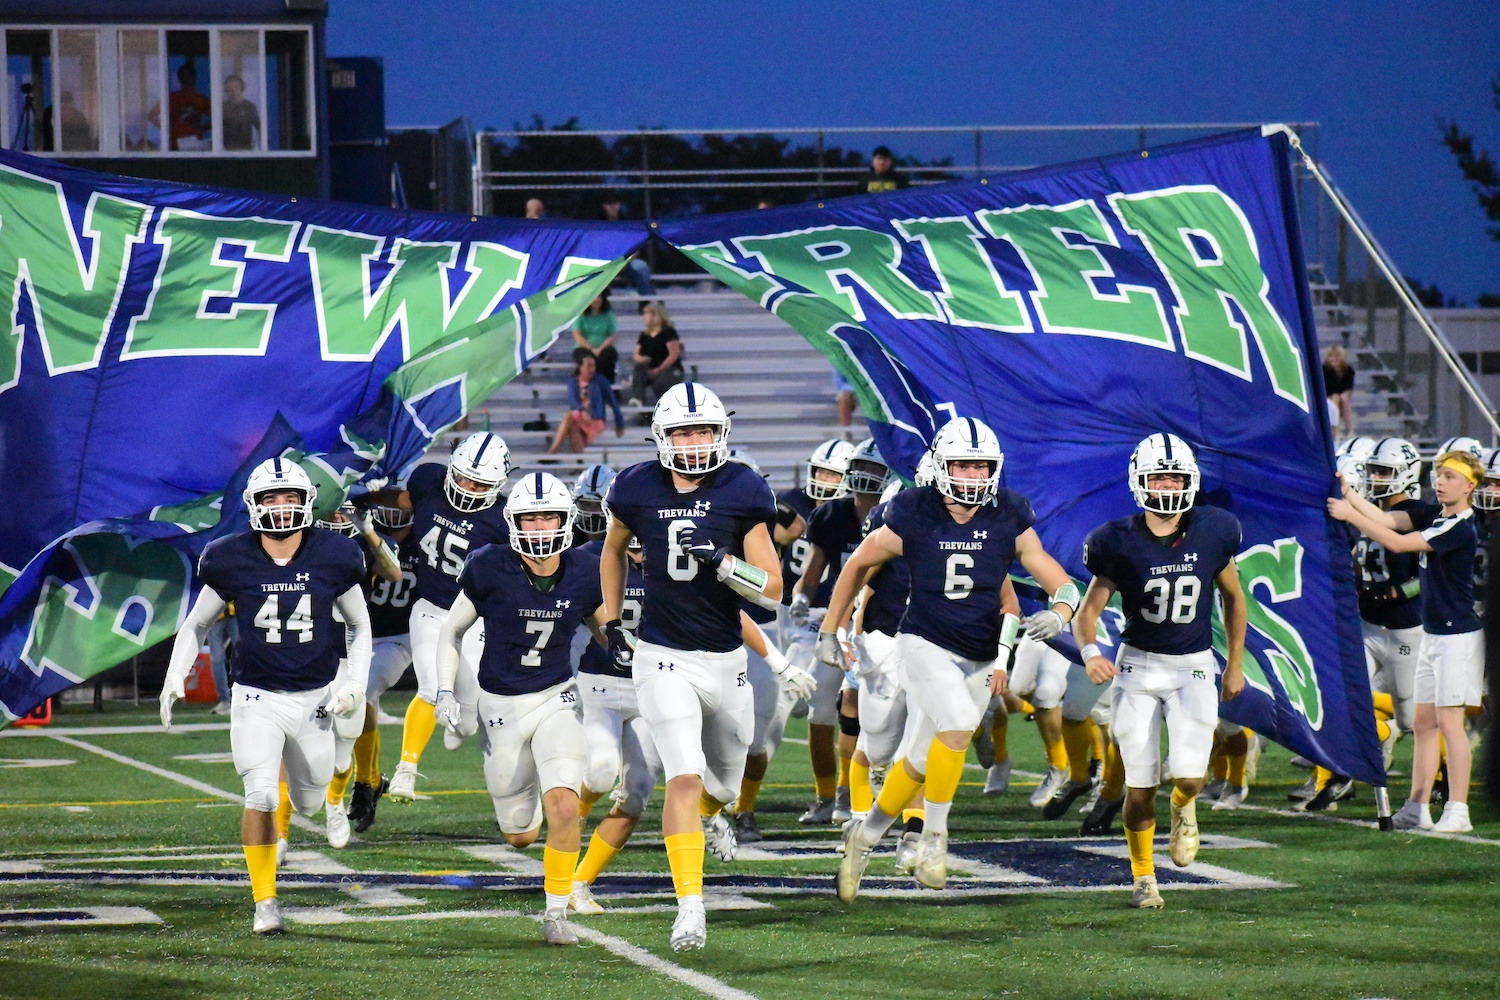 New Trier Outlasts Niles West Conditions To Keep Playoff Hopes Alive 